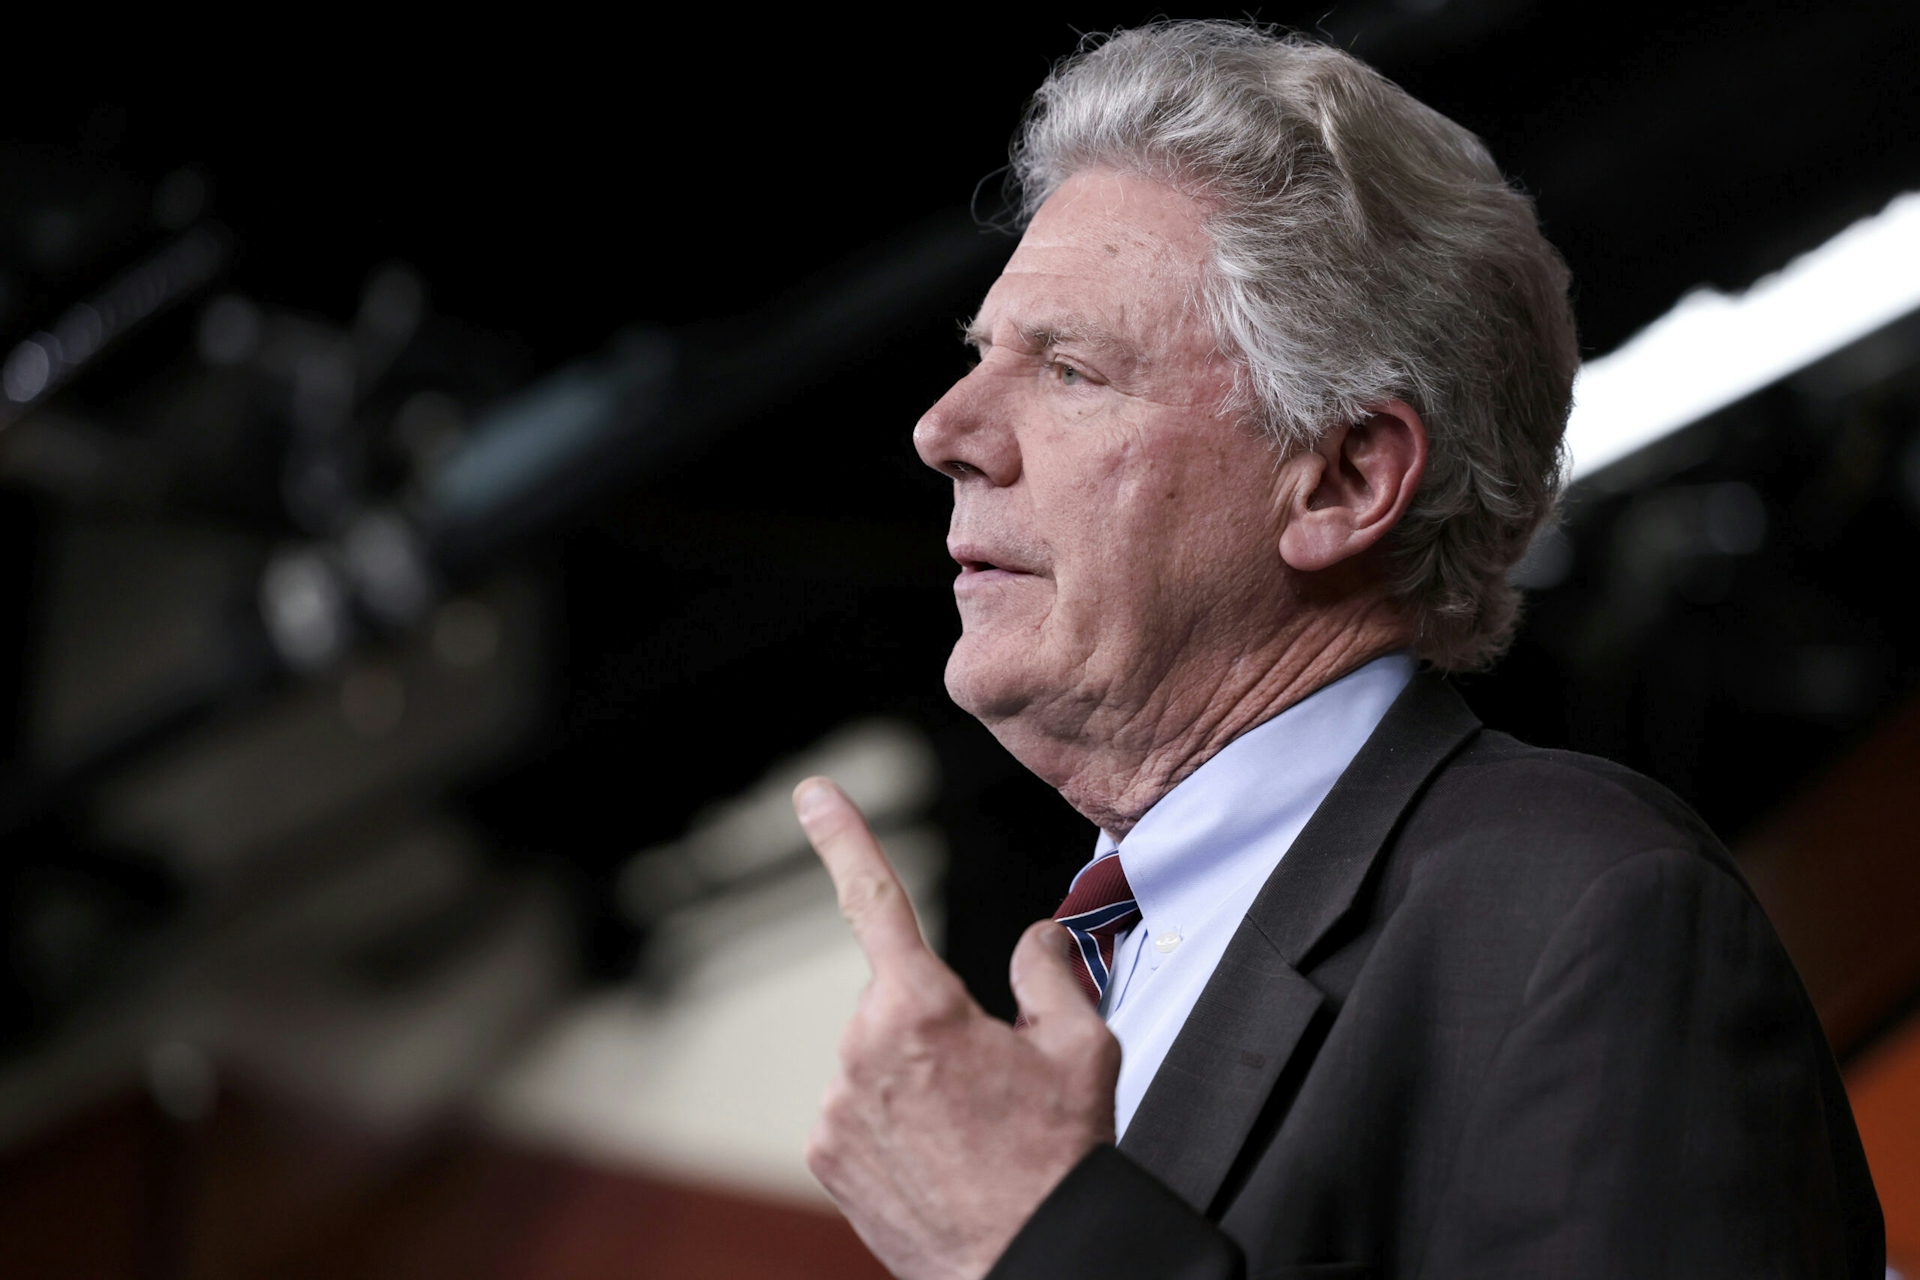 House Energy and Commerce Committee Chair Frank Pallone Jr. (D-N.J.) who introduced a bipartisan data privacy proposal